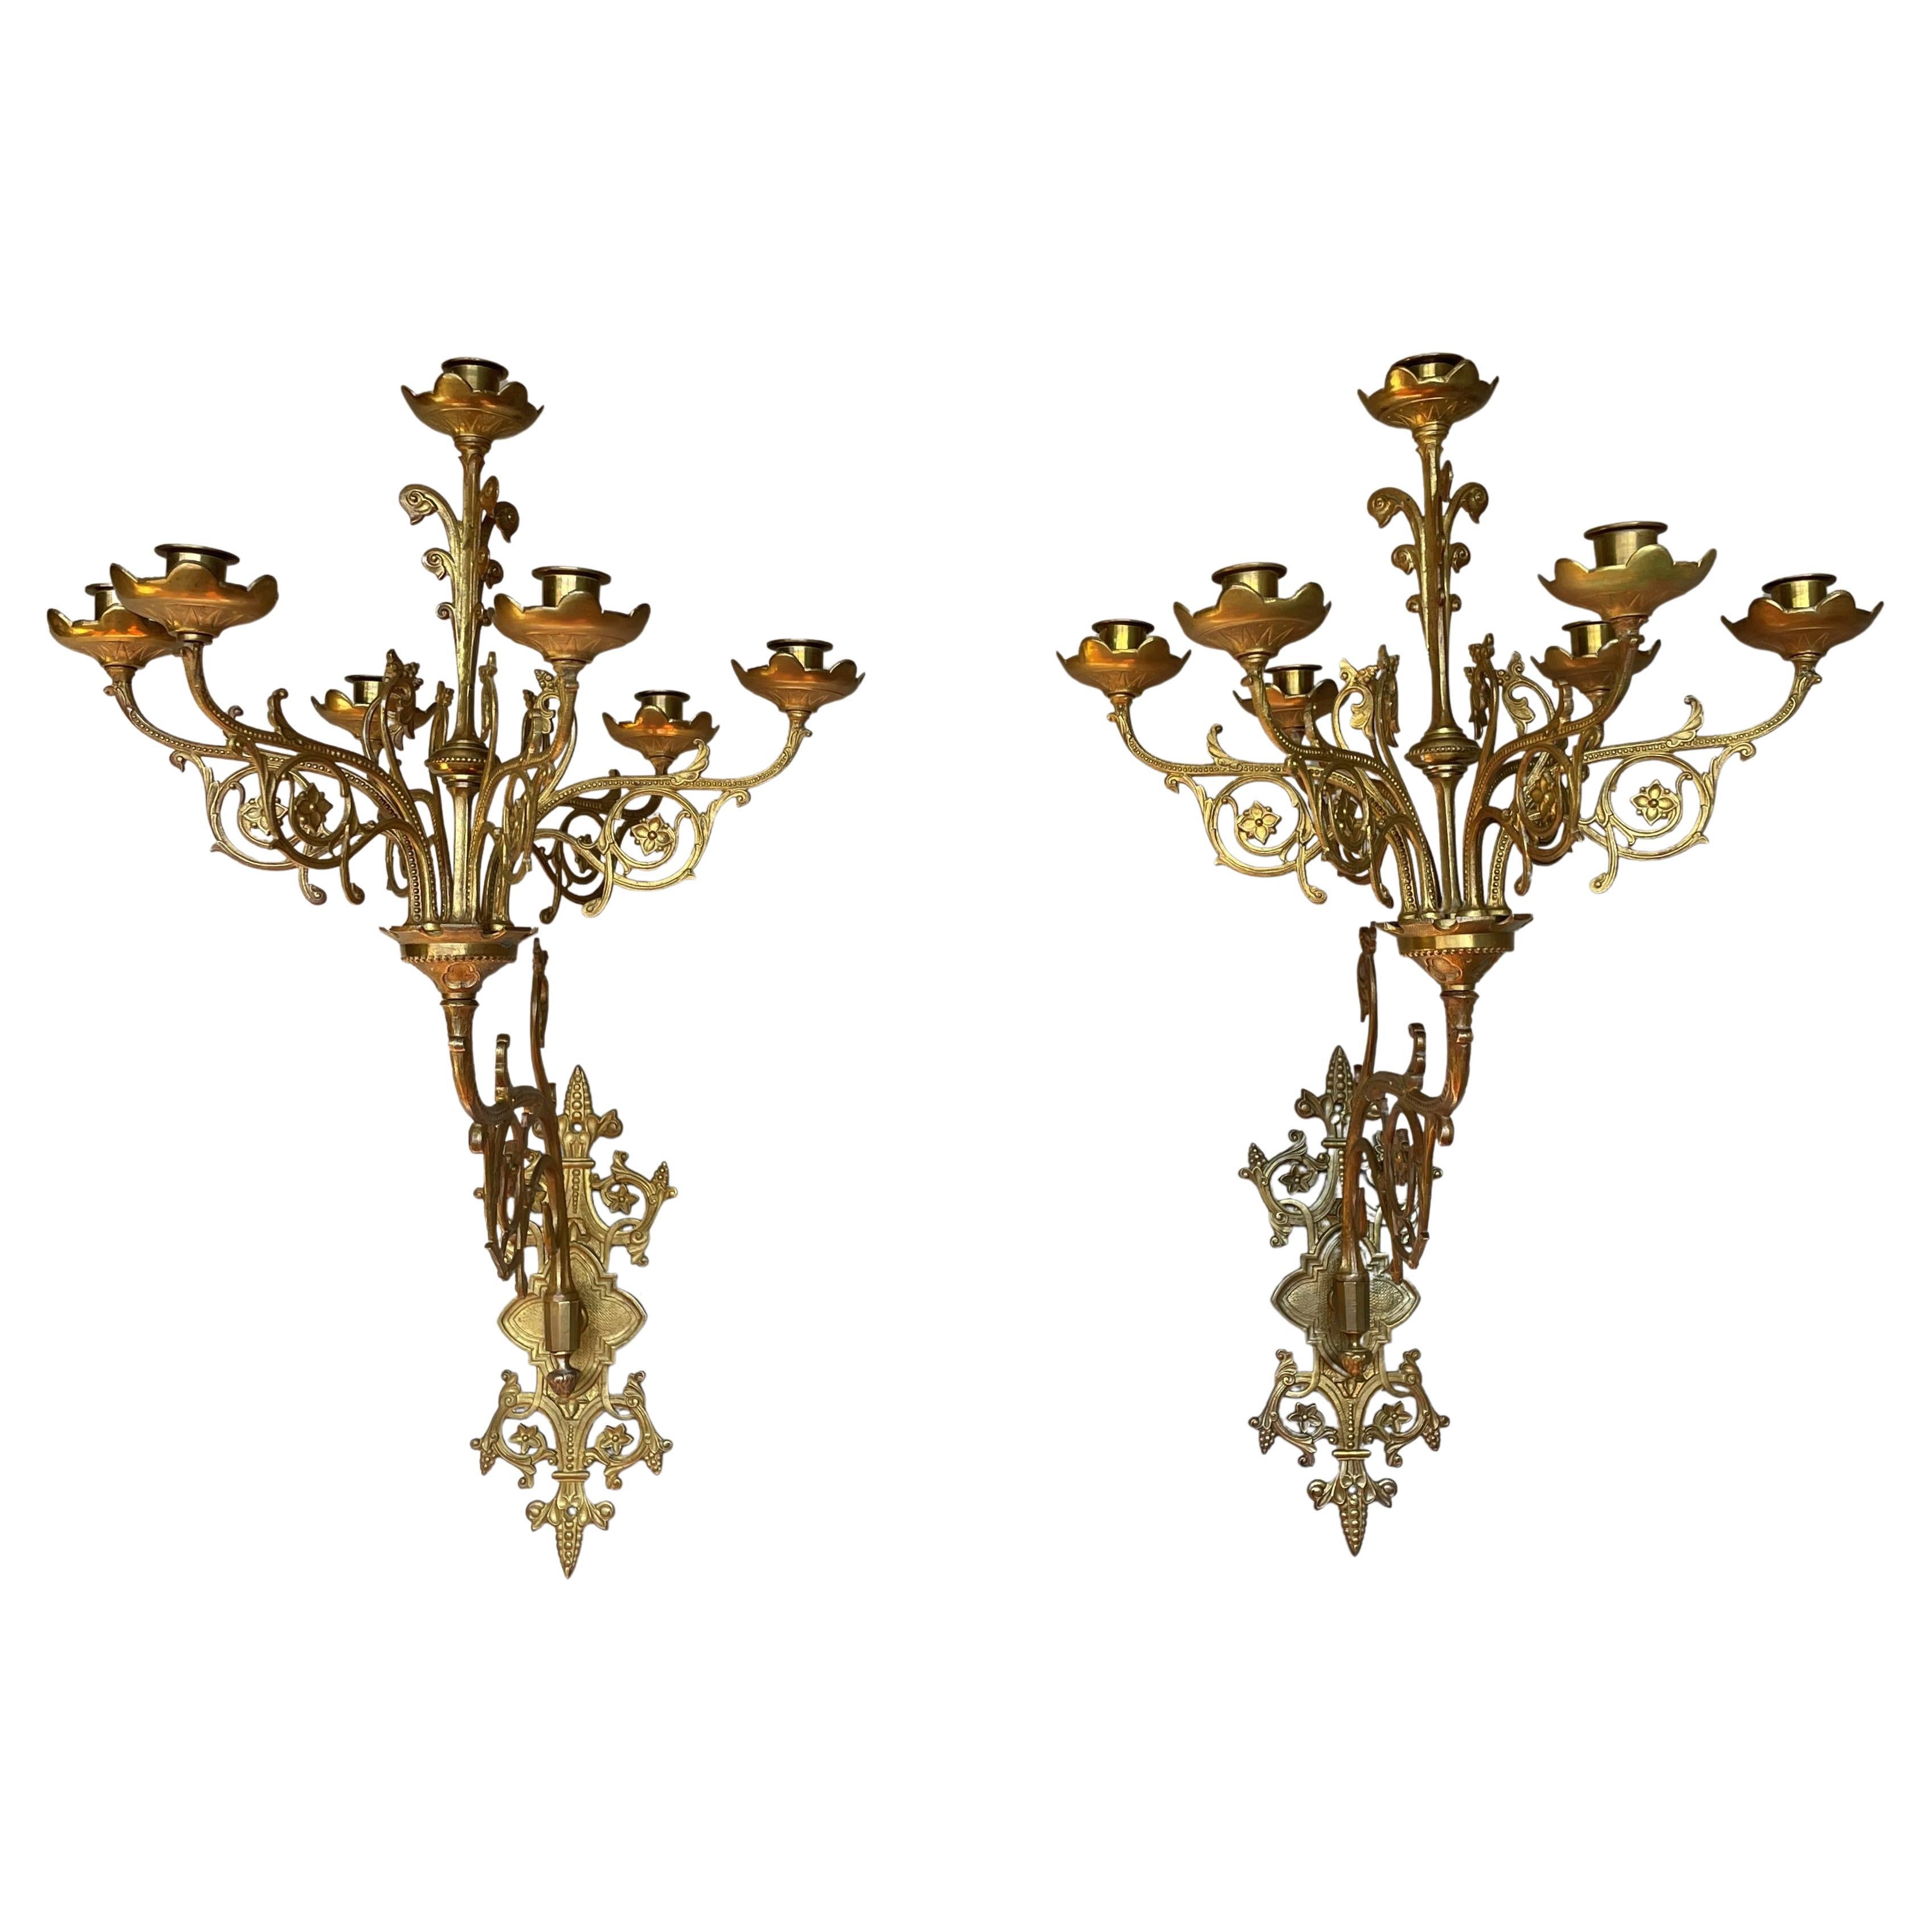 Large Pair of Gothic Revival Gilt Bronze Church Wall Candelabras Candle Sconces